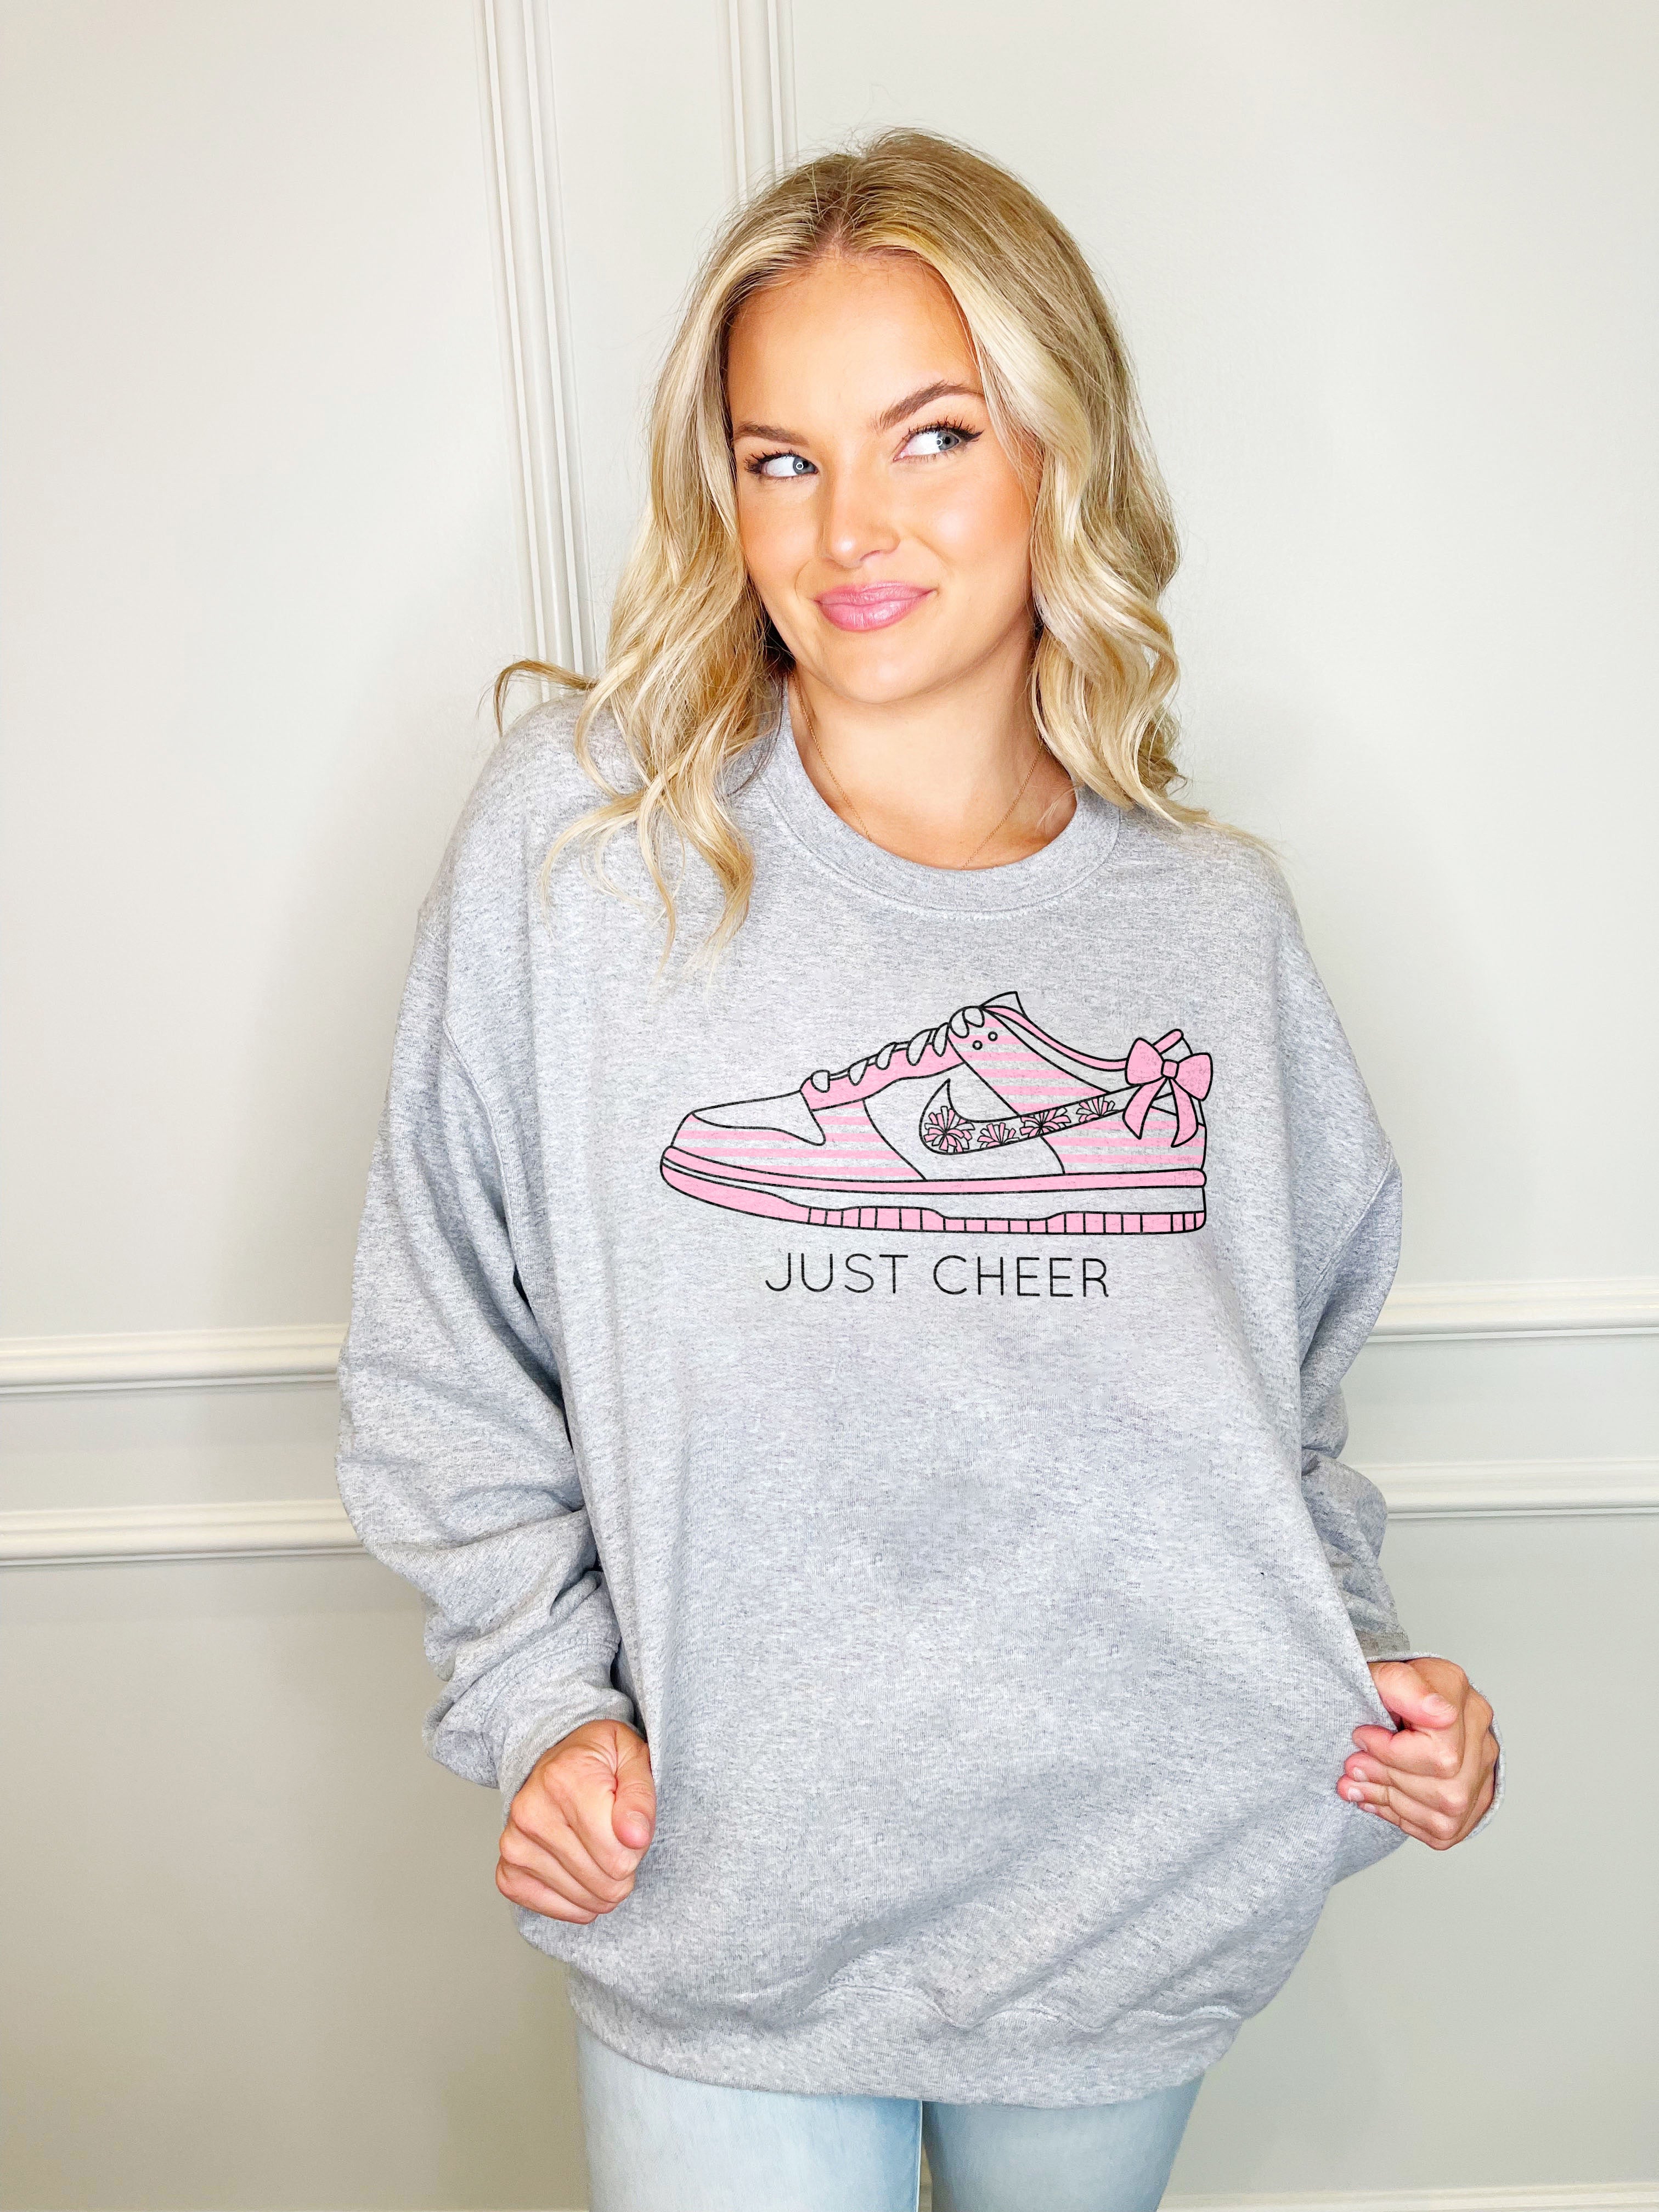 Just Cheer Youth and Adult Sweatshirt